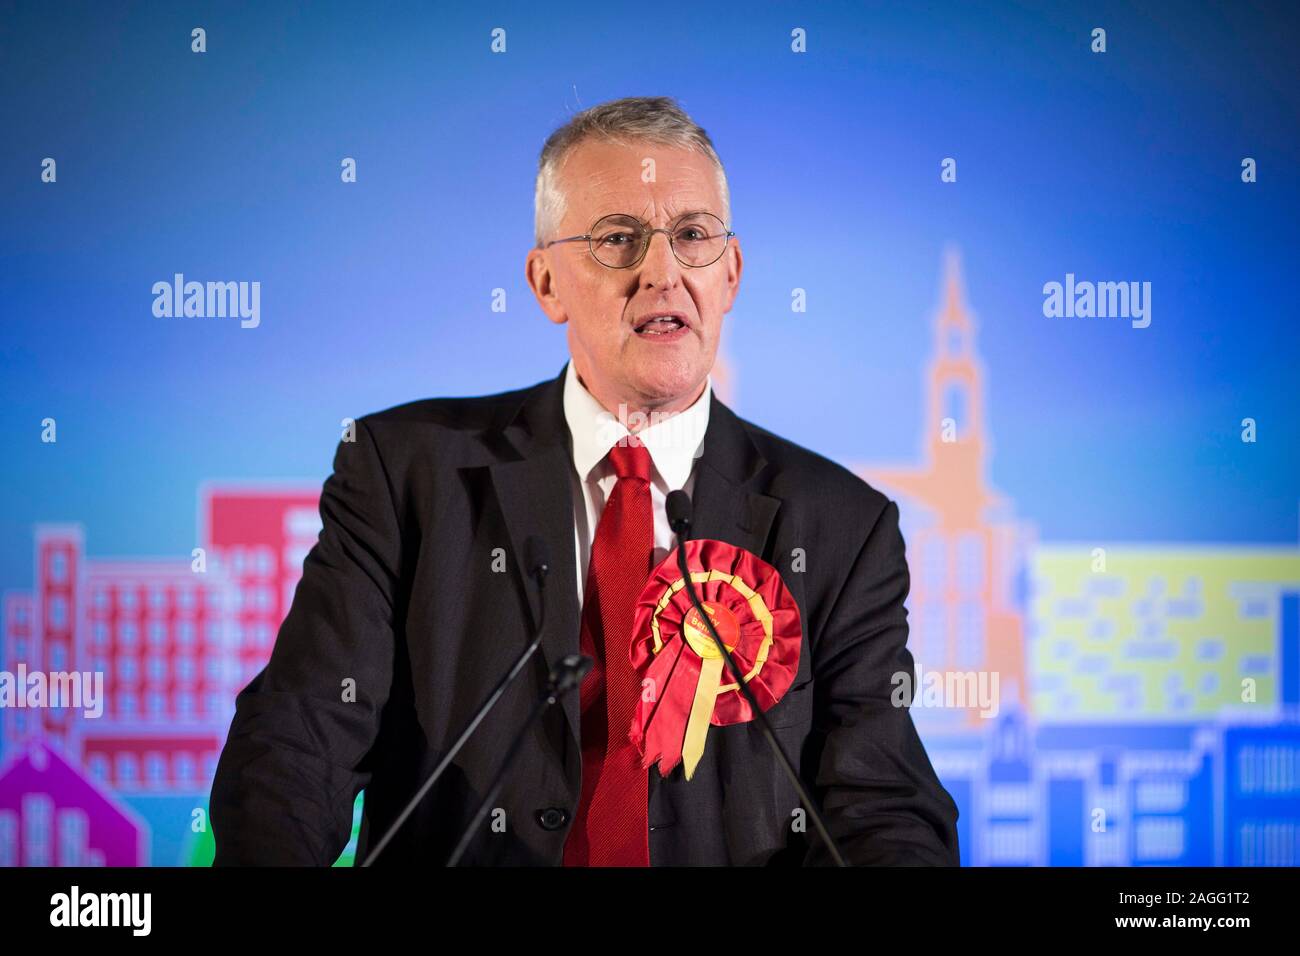 Picture by Chris Bull   13/12/19 General Election 2019 count and results at Leeds Arena. Leeds Central Labour candidate Hilary Benn on stage after being declared winner.  www.chrisbullphotographer.com Stock Photo